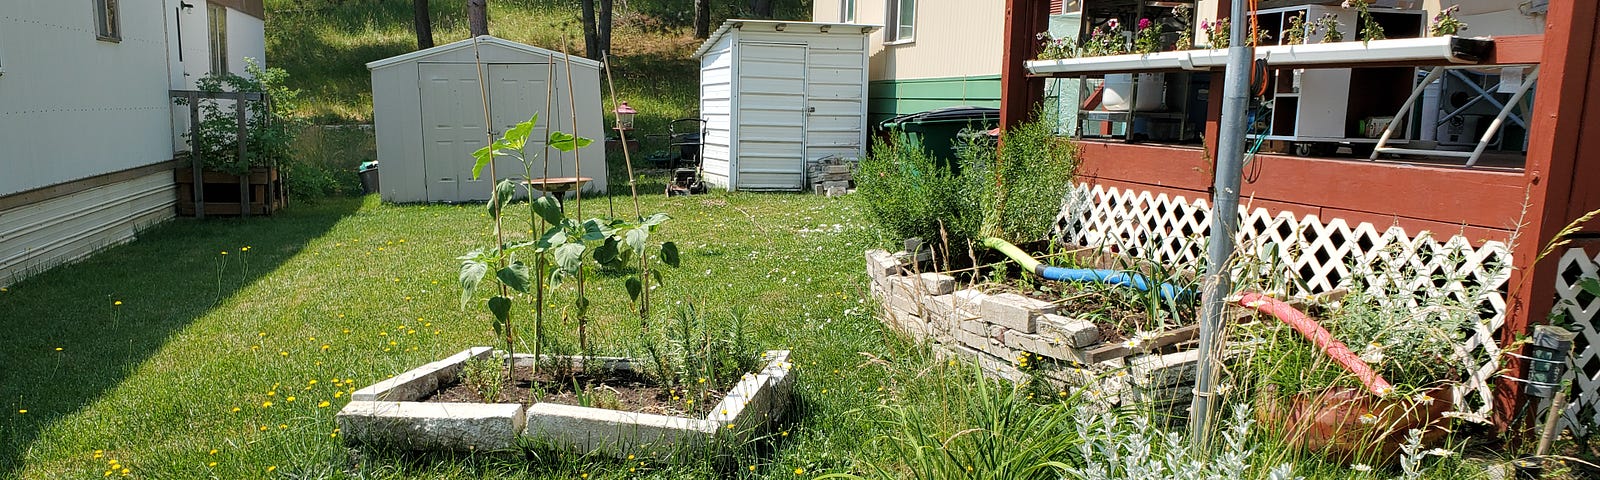 Yard in a mobile home park between two mobile homes with tire planters, raised beds made from concrete bricks and yellow wildflowers growing in the lawn.